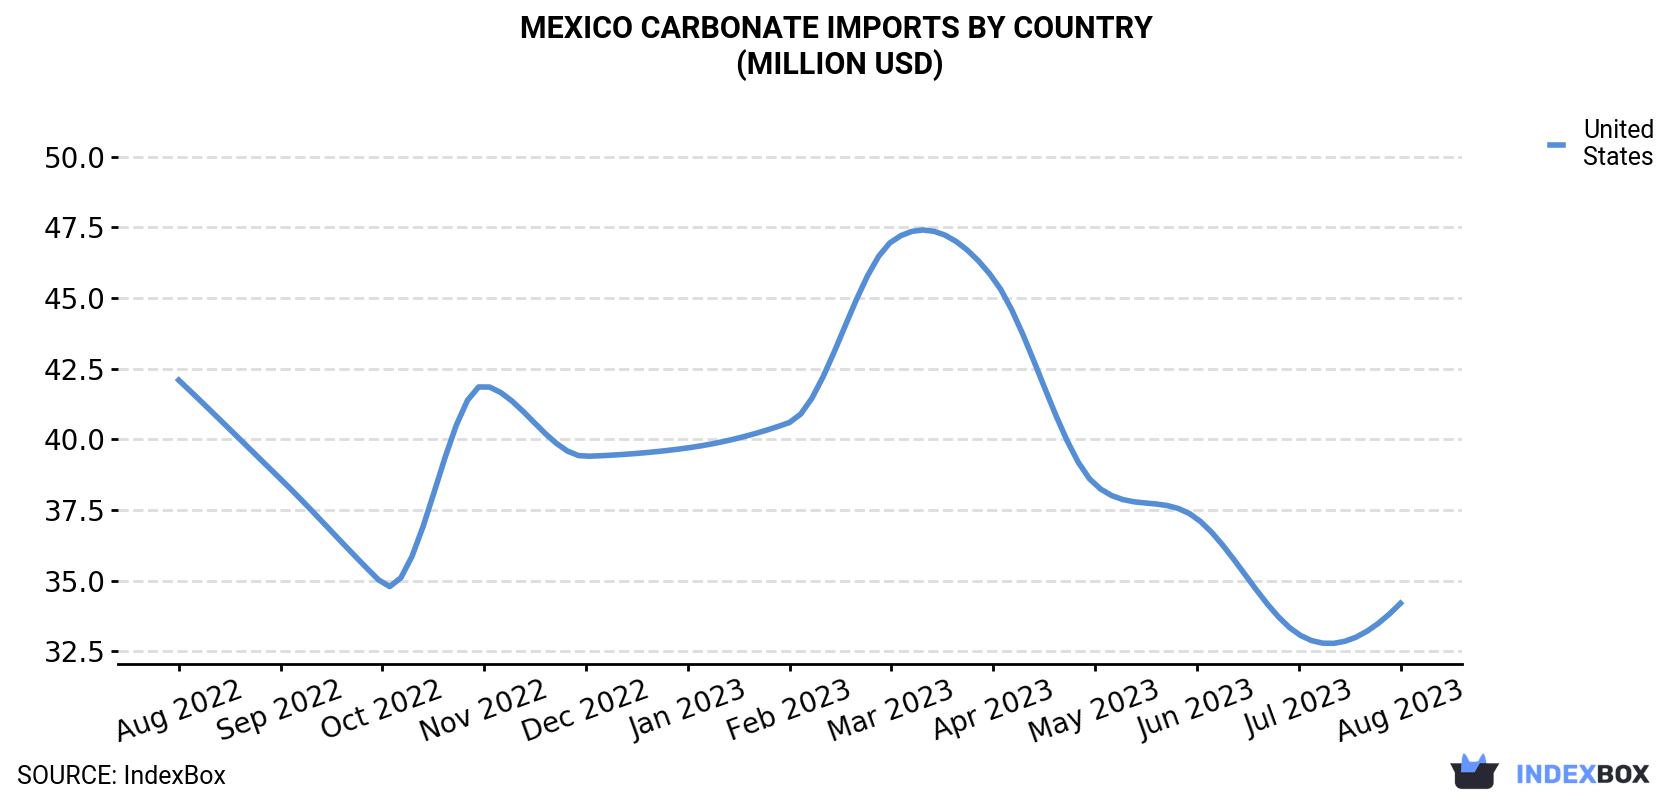 Mexico Carbonate Imports By Country (Million USD)